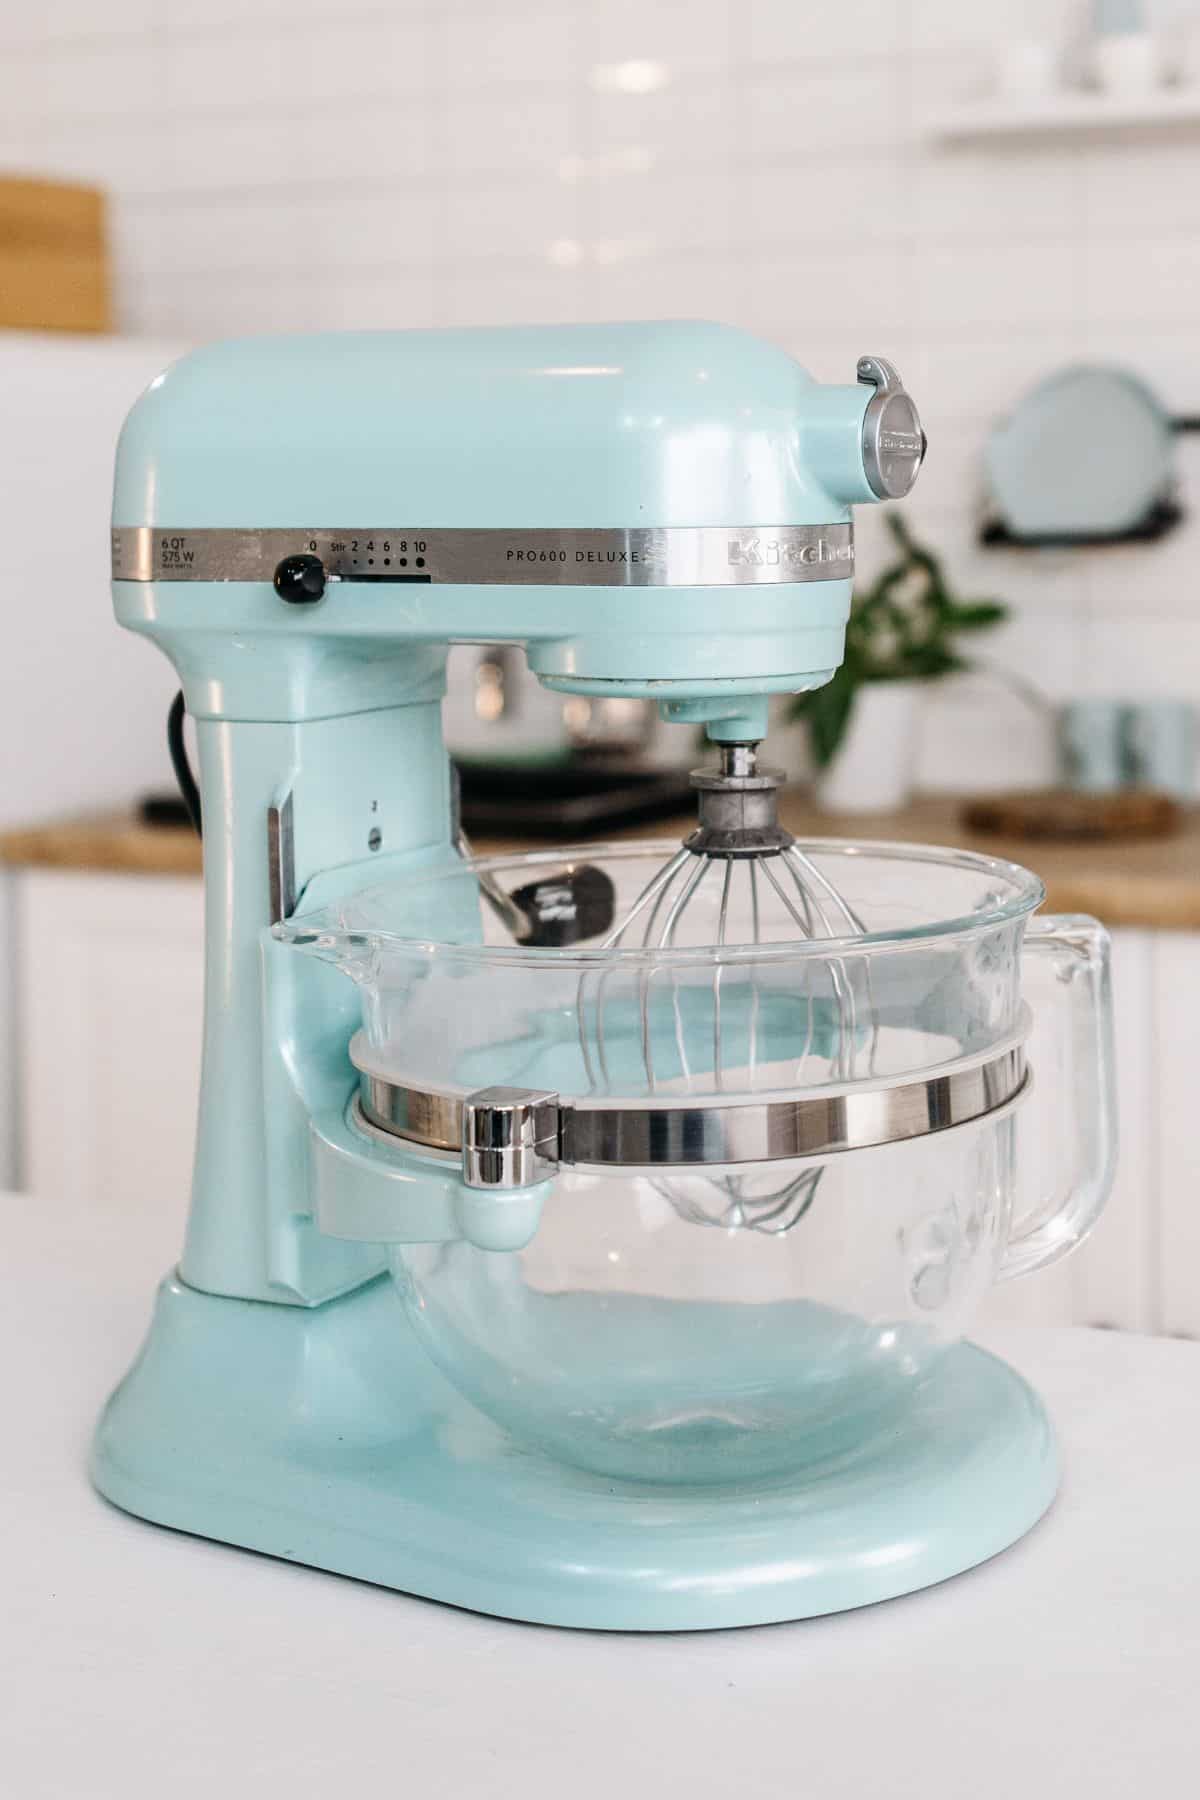 a blue stand mixer on a counter.